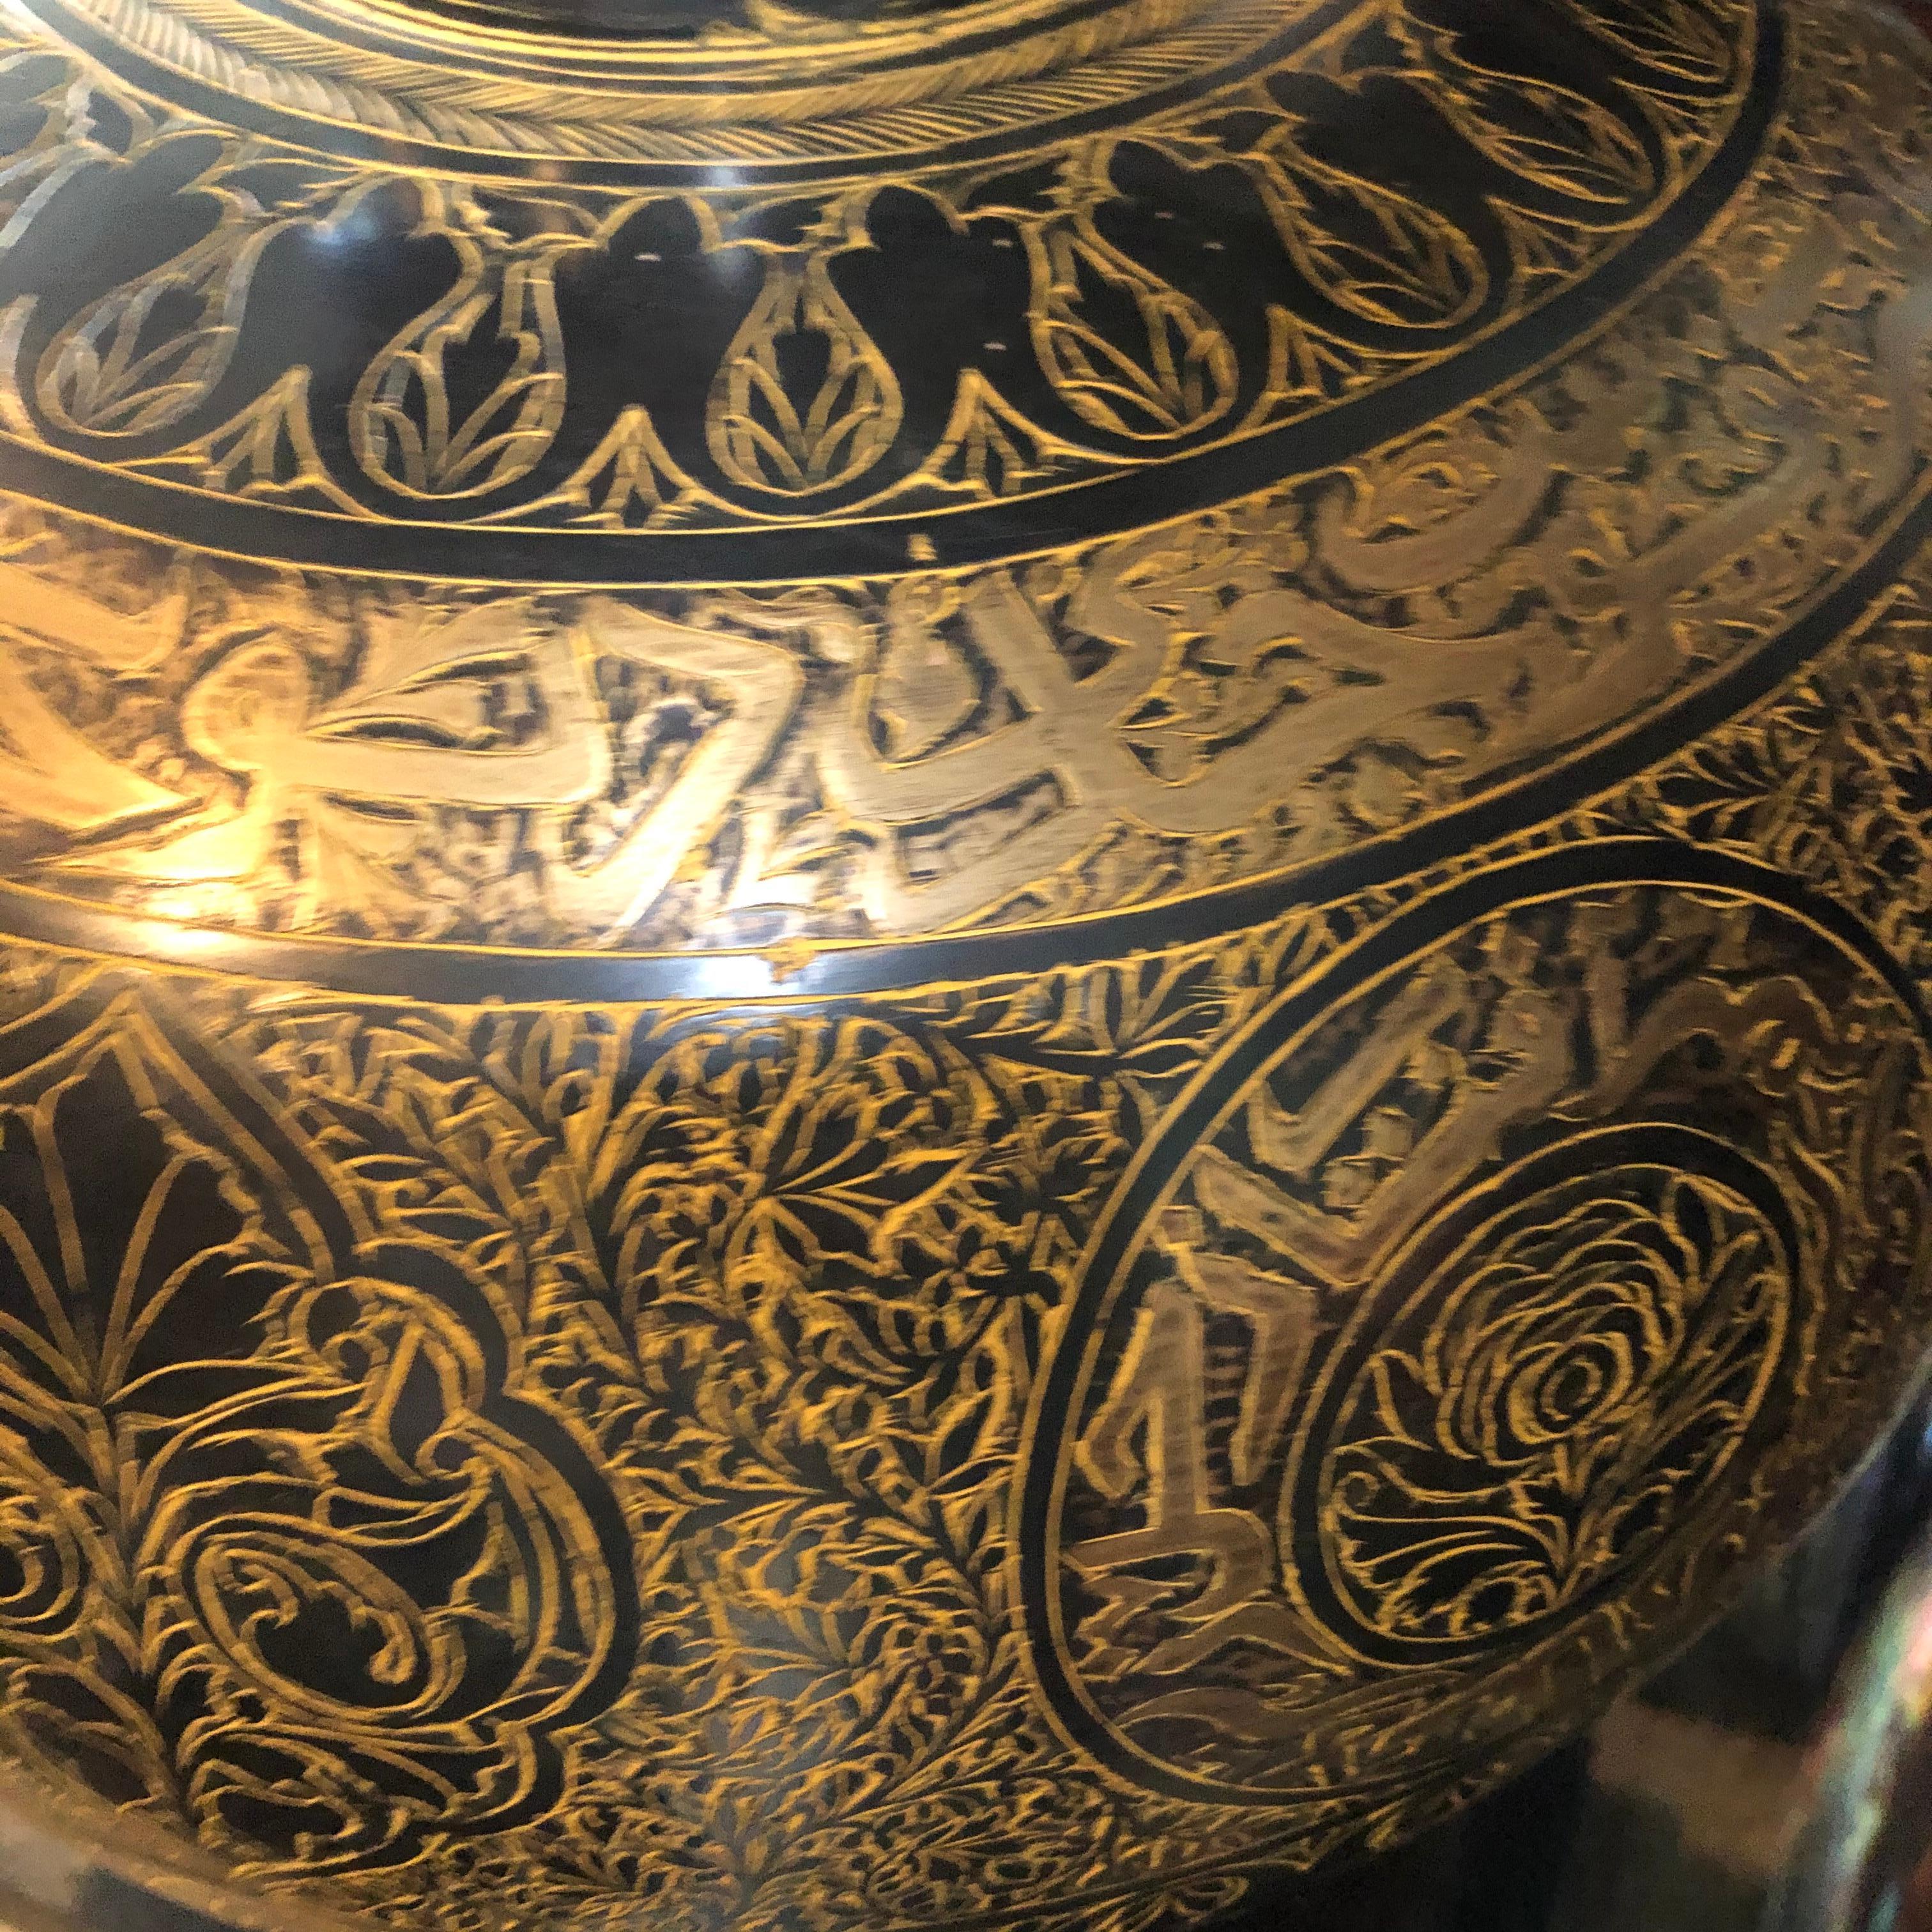 1940s Indian bronze urn with beautifully detailed hand-chasing and guilting.